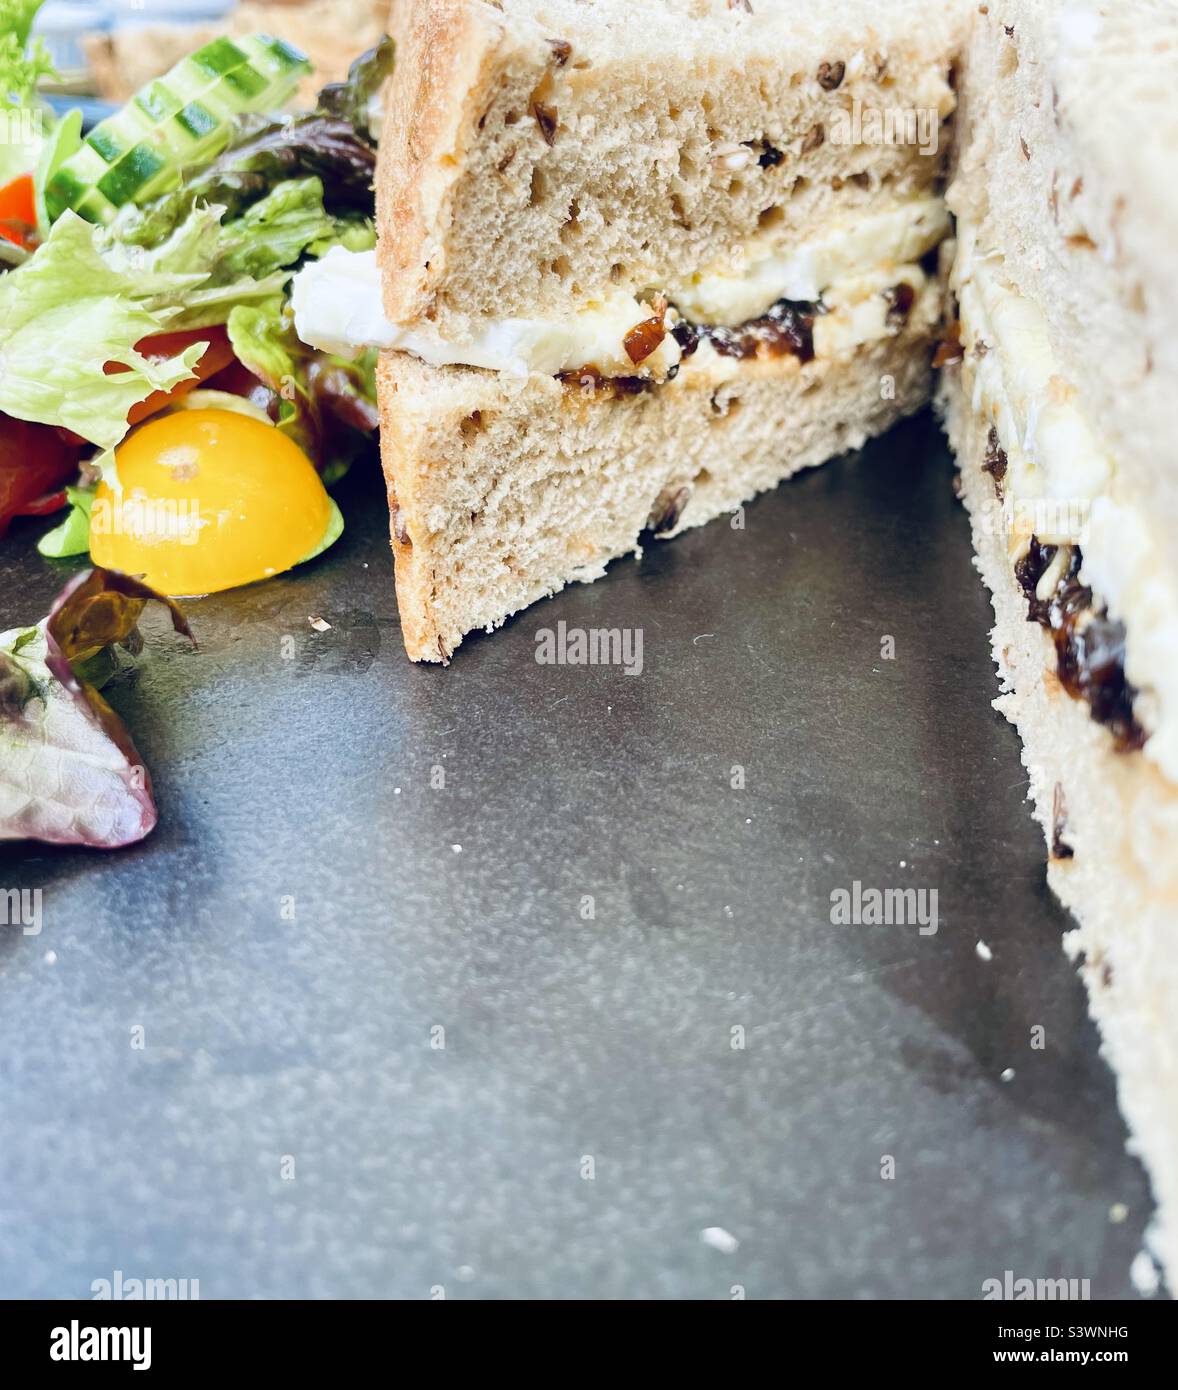 Doorstop Sandwich! Thick slices of granary bread with Brie and red onion chutney, side salad. Stock Photo